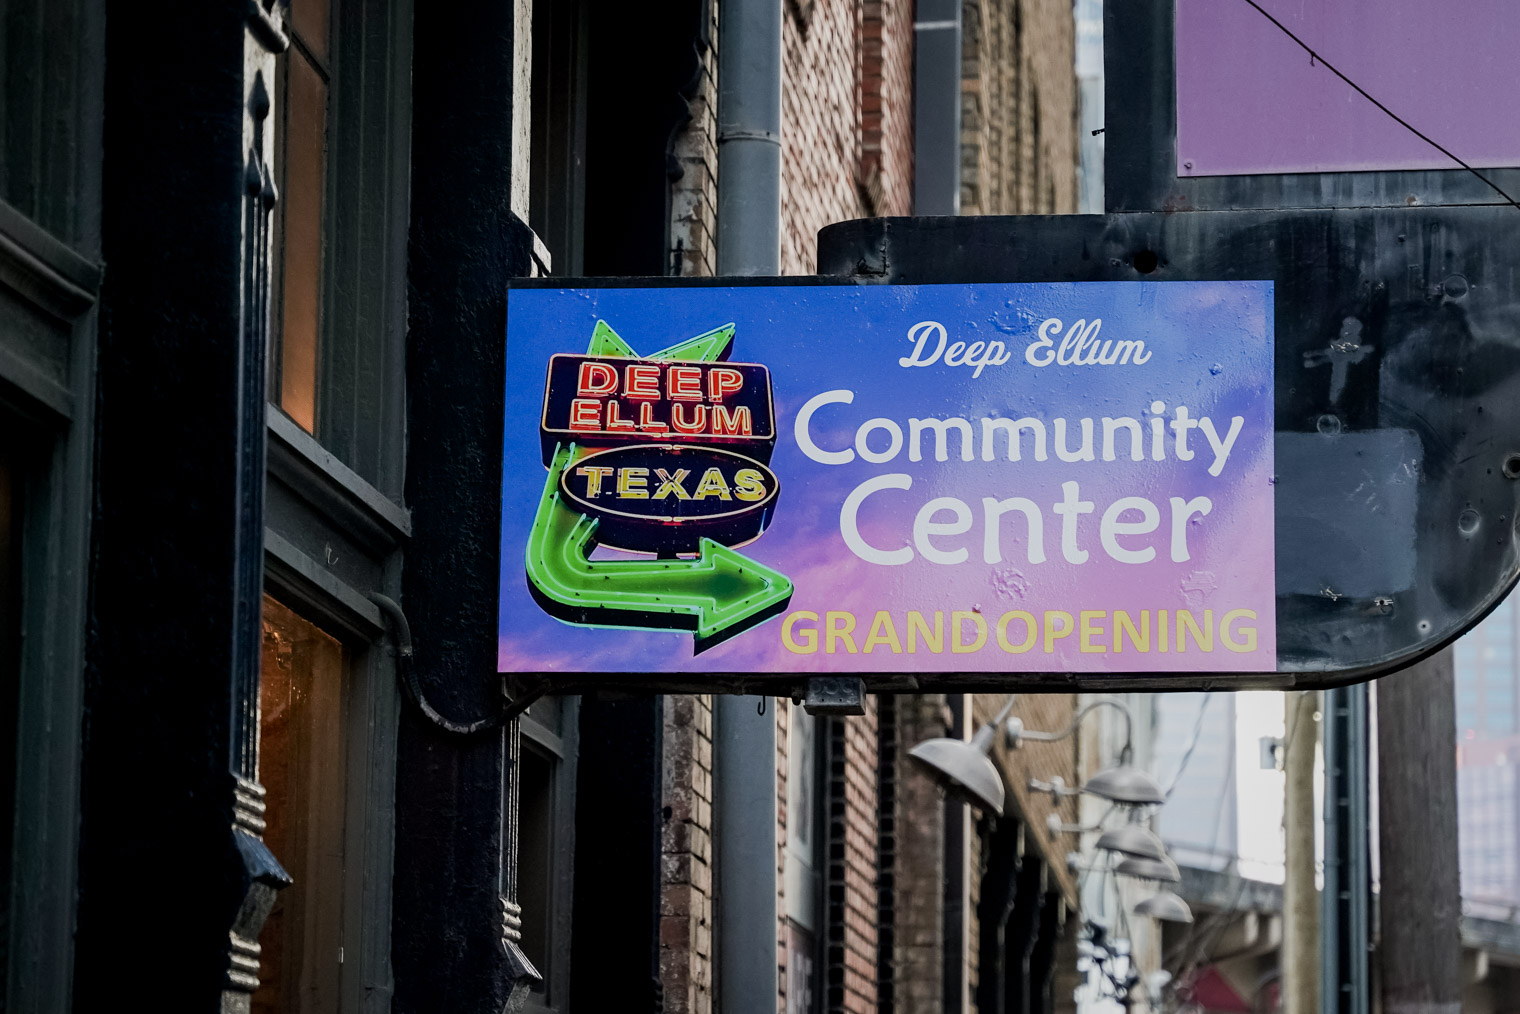 A sign that says "Deep Ellum Community Center Grand Opening"